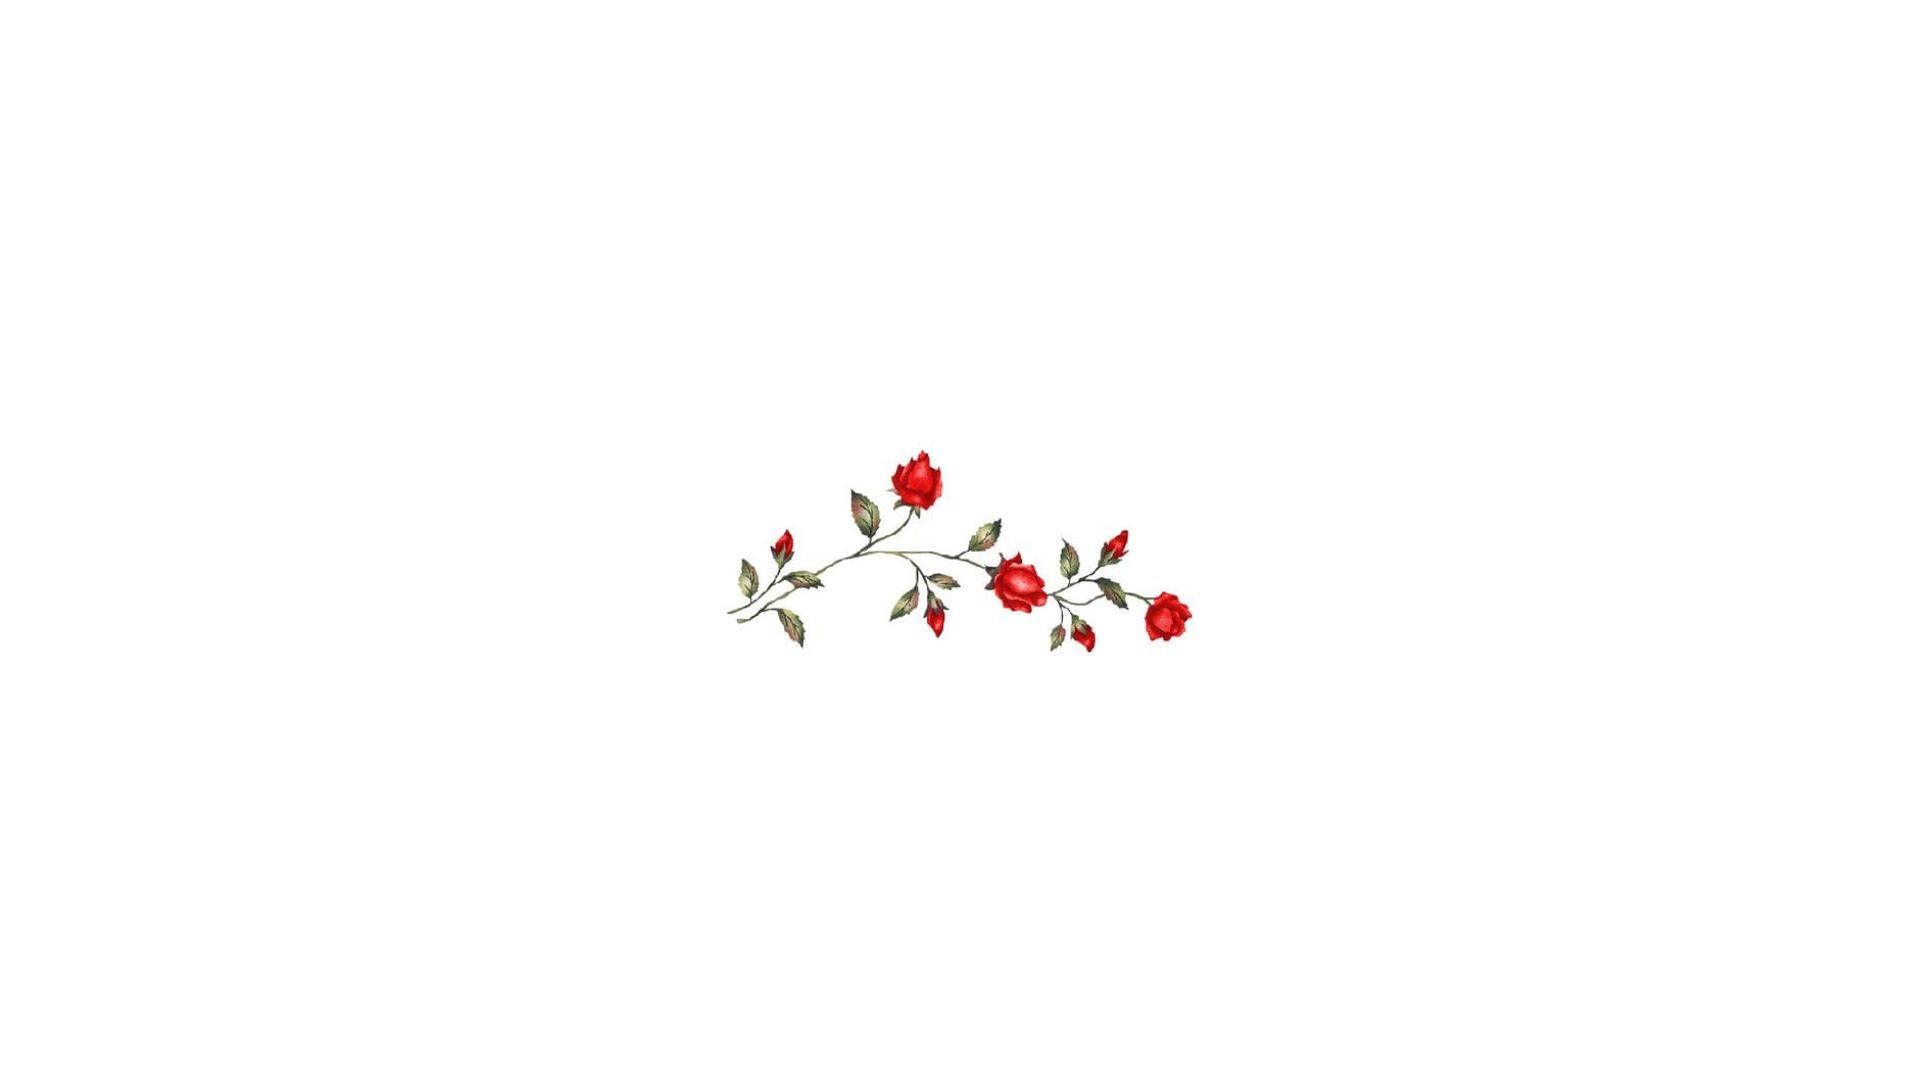 A red flower with leaves on it - White, cute white